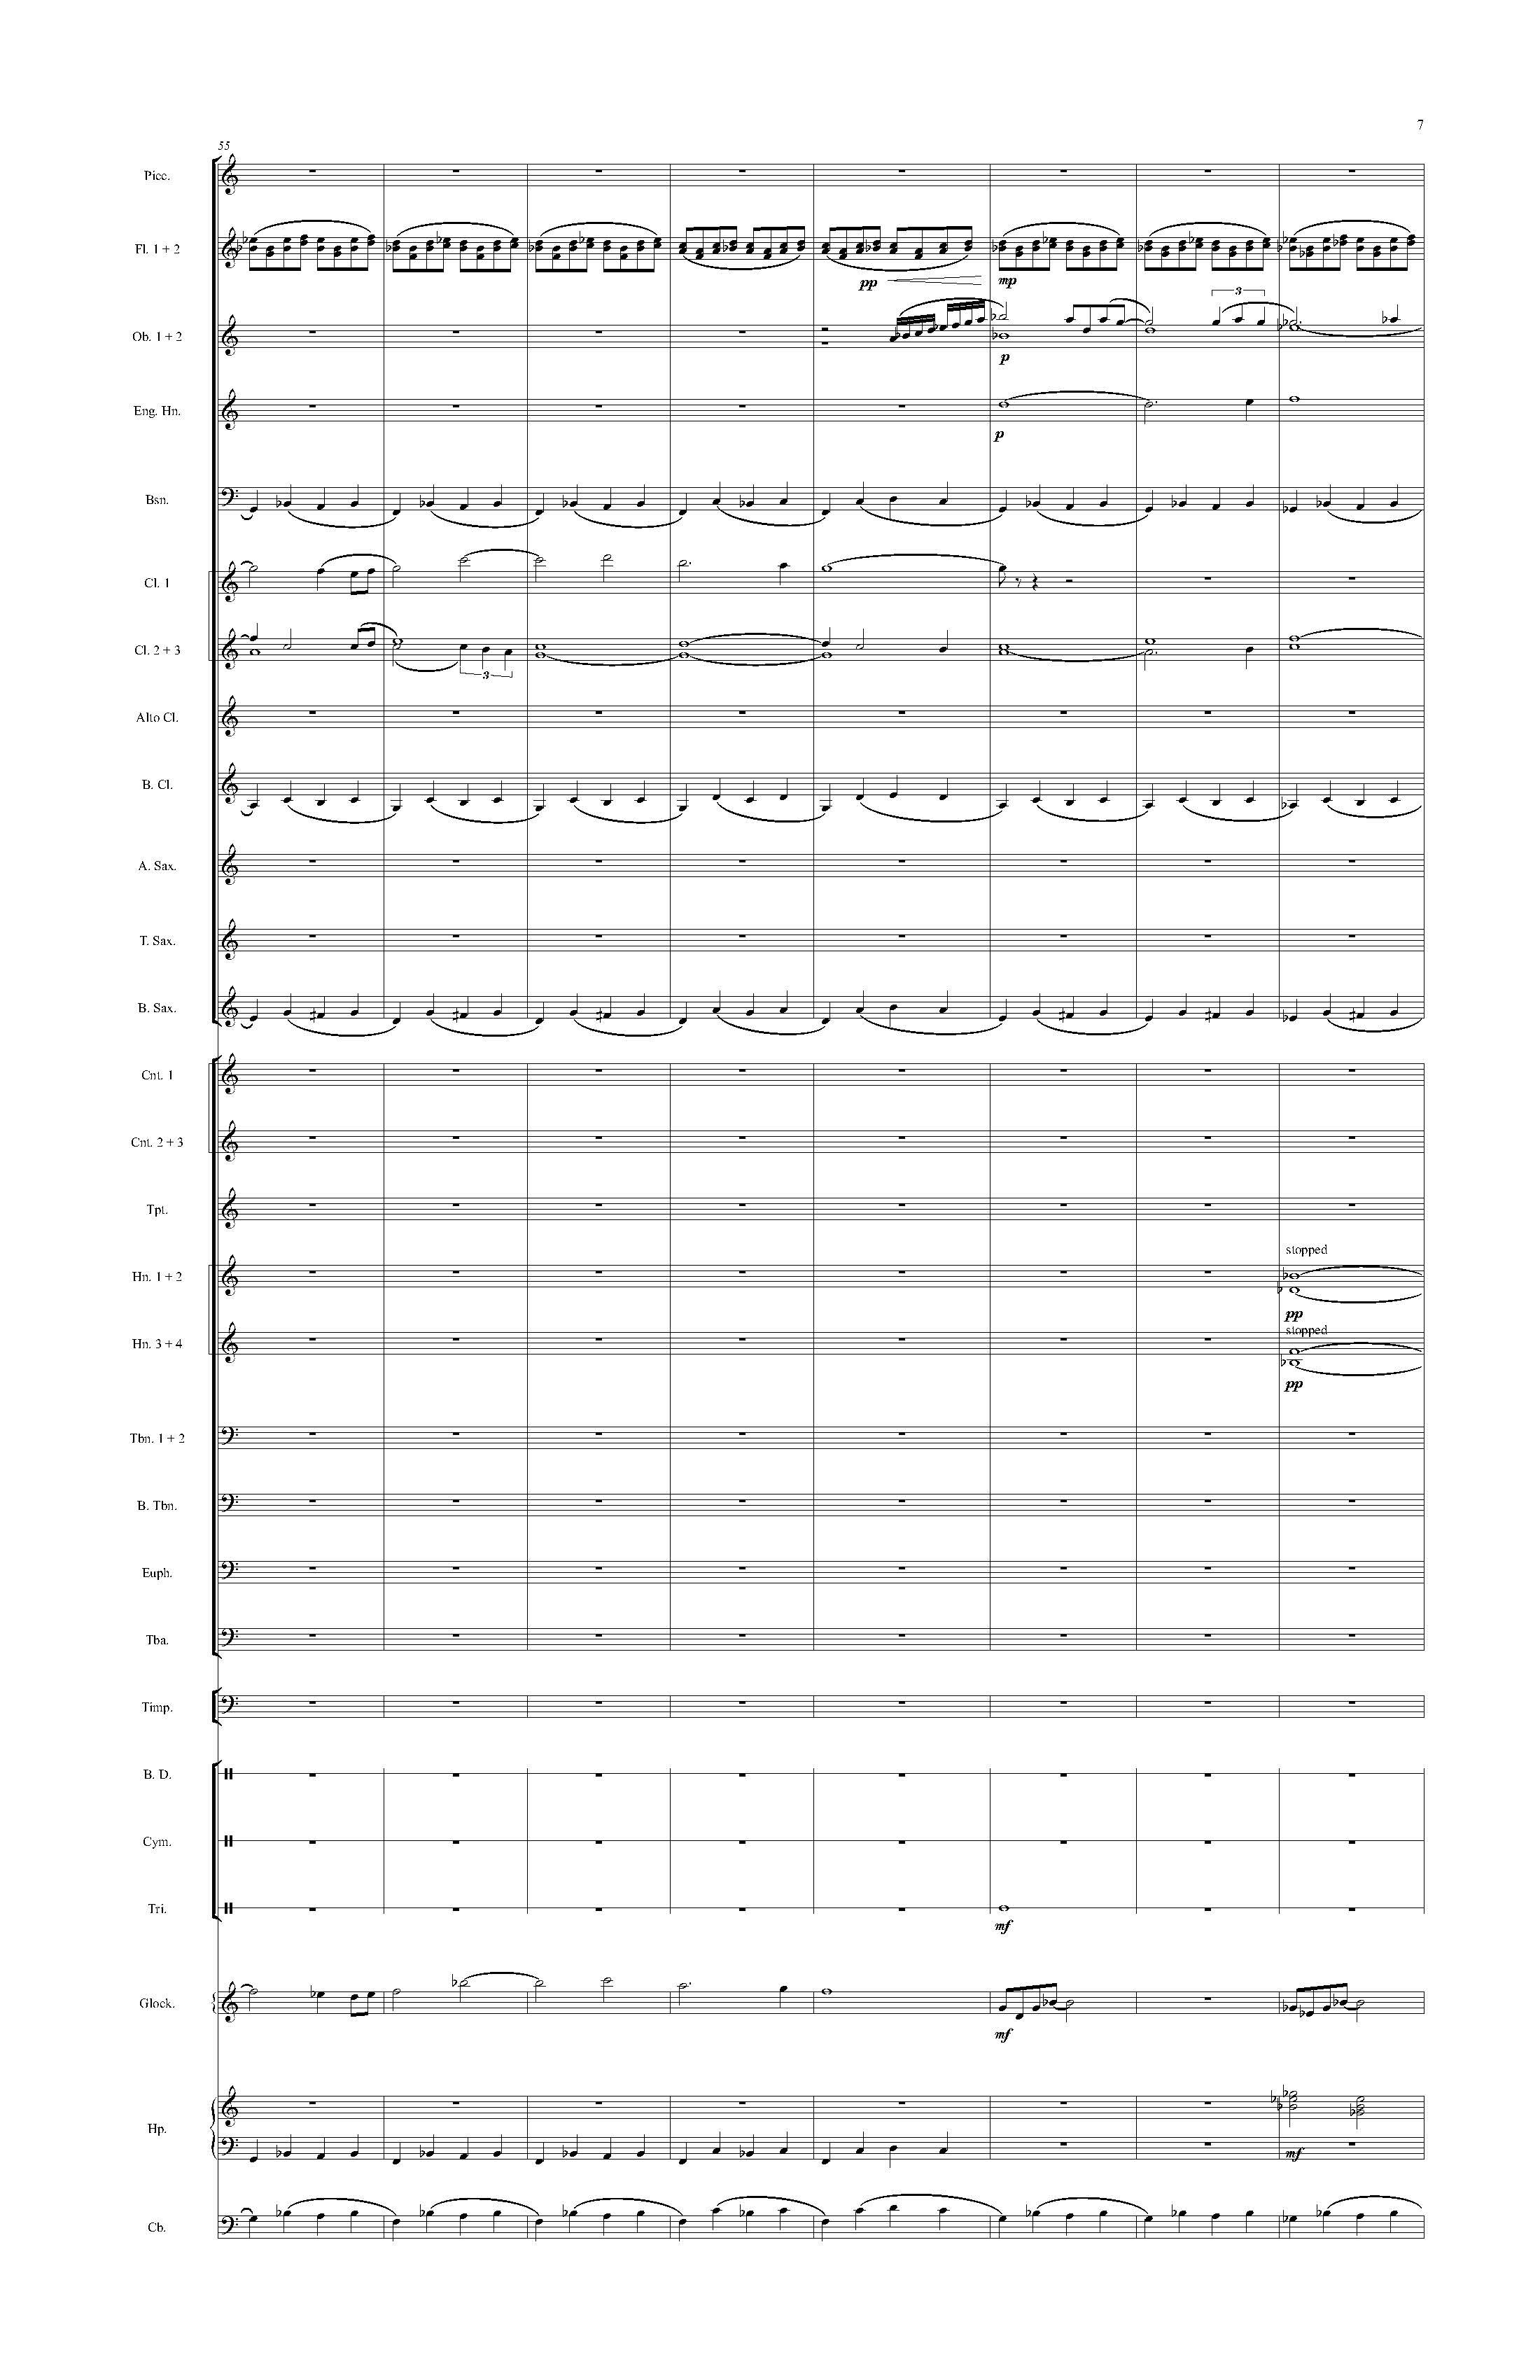 Psyche - Complete Score_Page_13.jpg